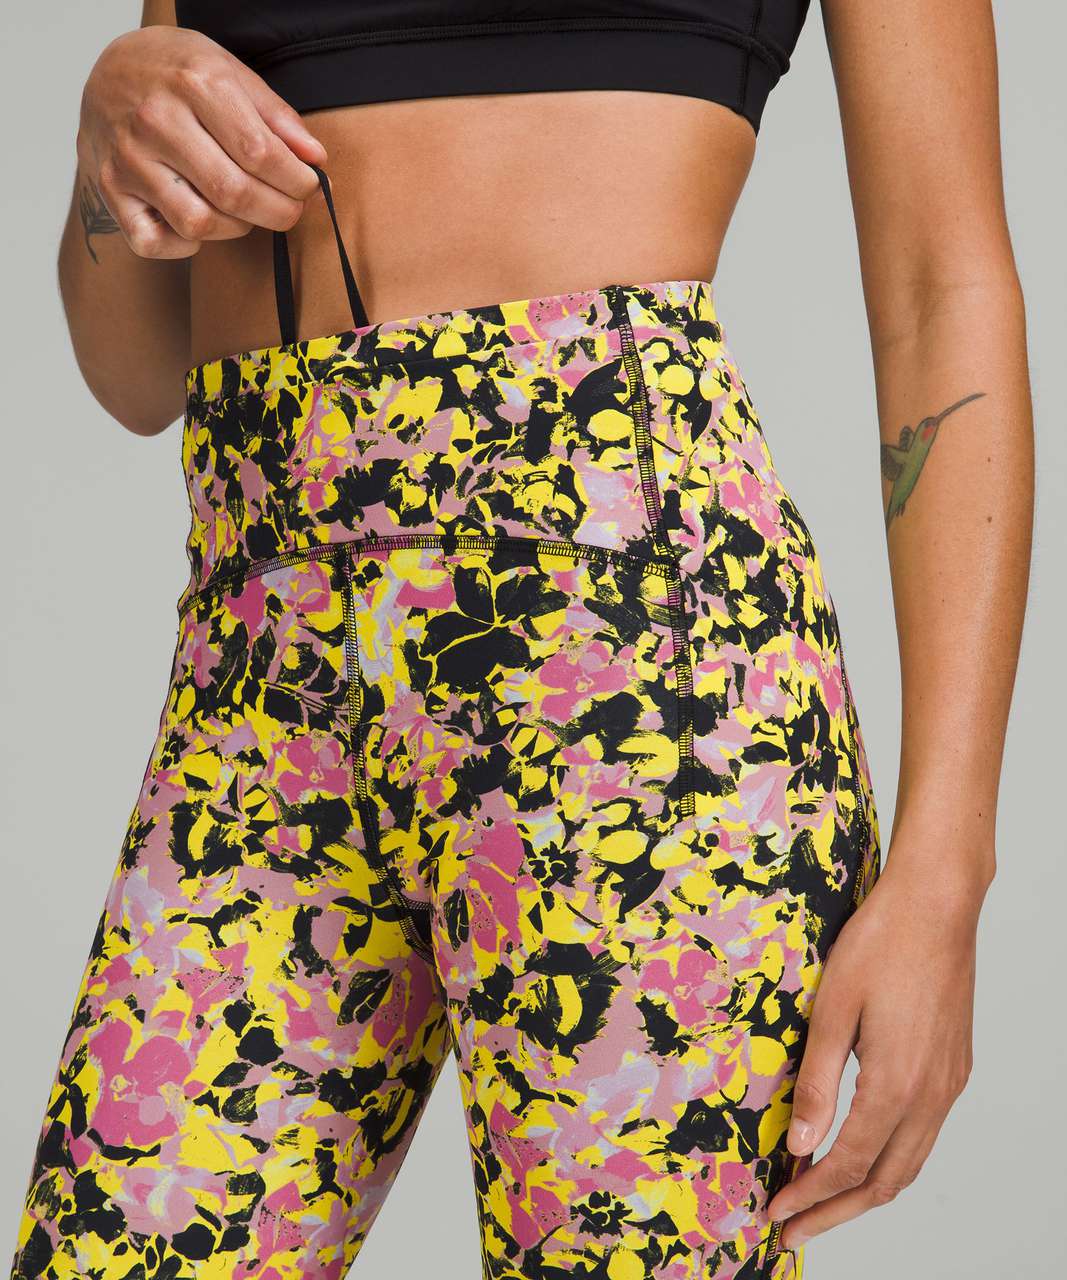 Lululemon Swift Speed High-Rise Tight 25" - Inflect Floral Highlight Yellow Multi